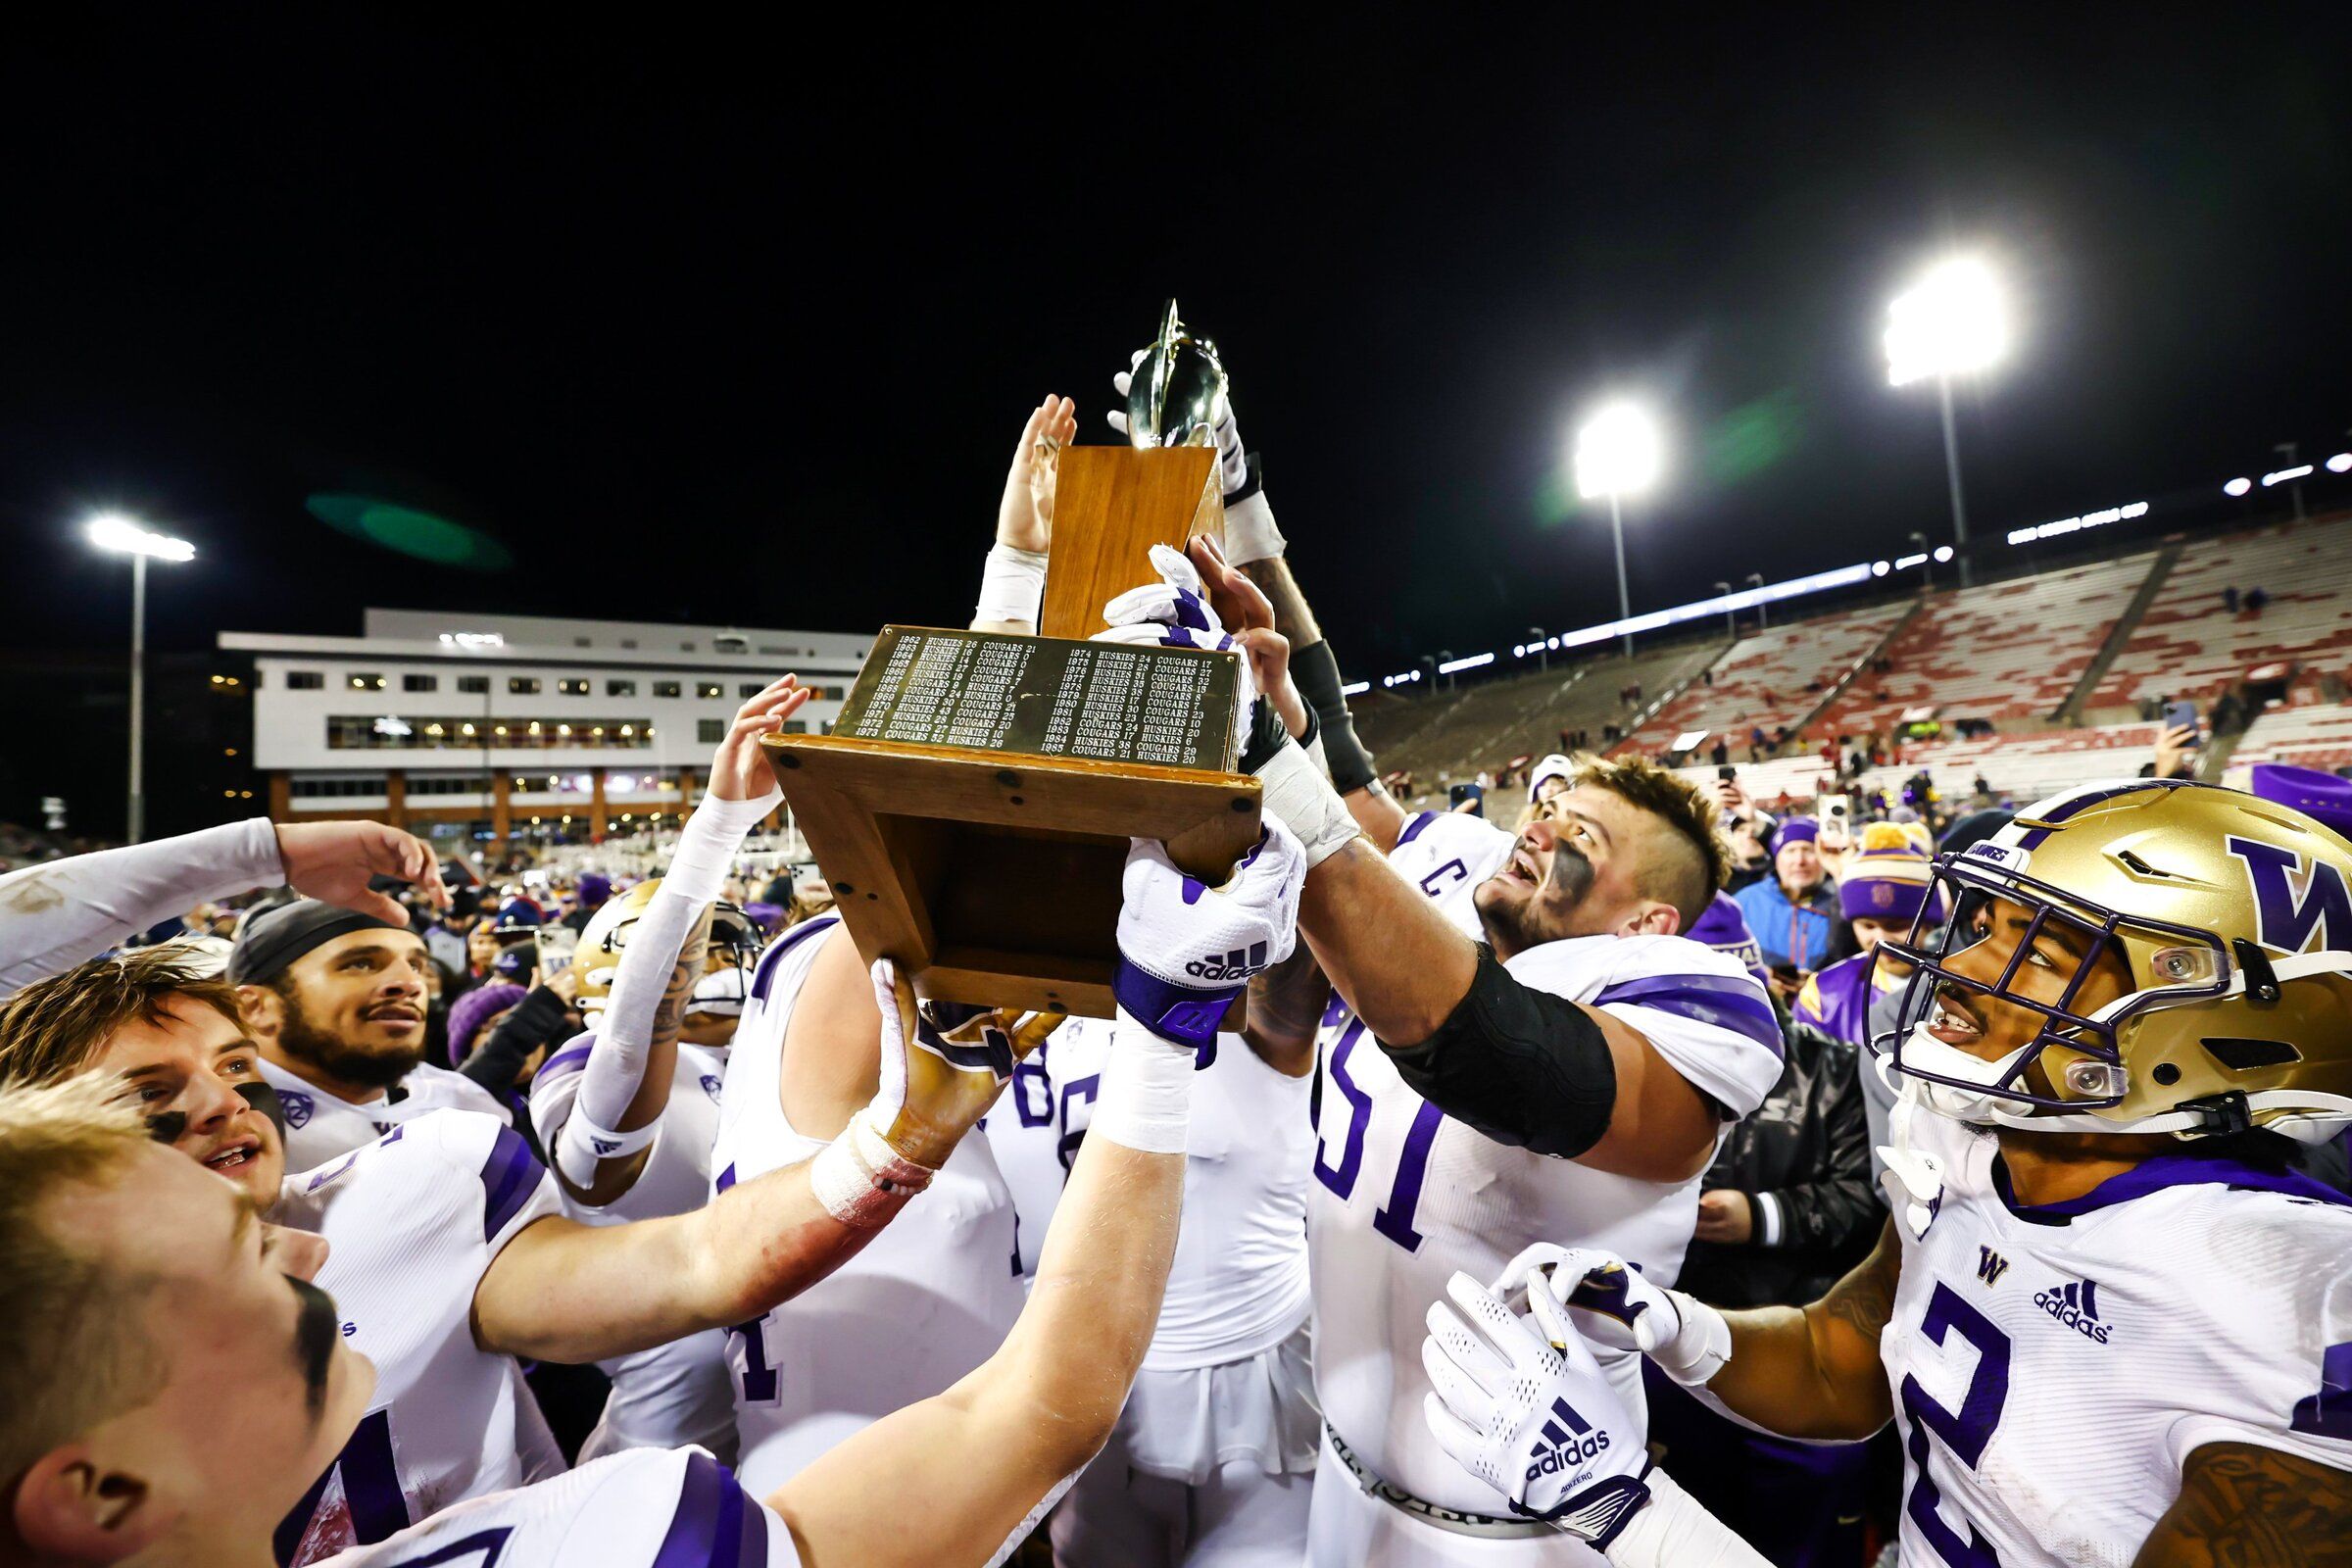 Apple Cup GameCenter Live updates, highlights, how to watch, stream UW-WSU The Seattle Times